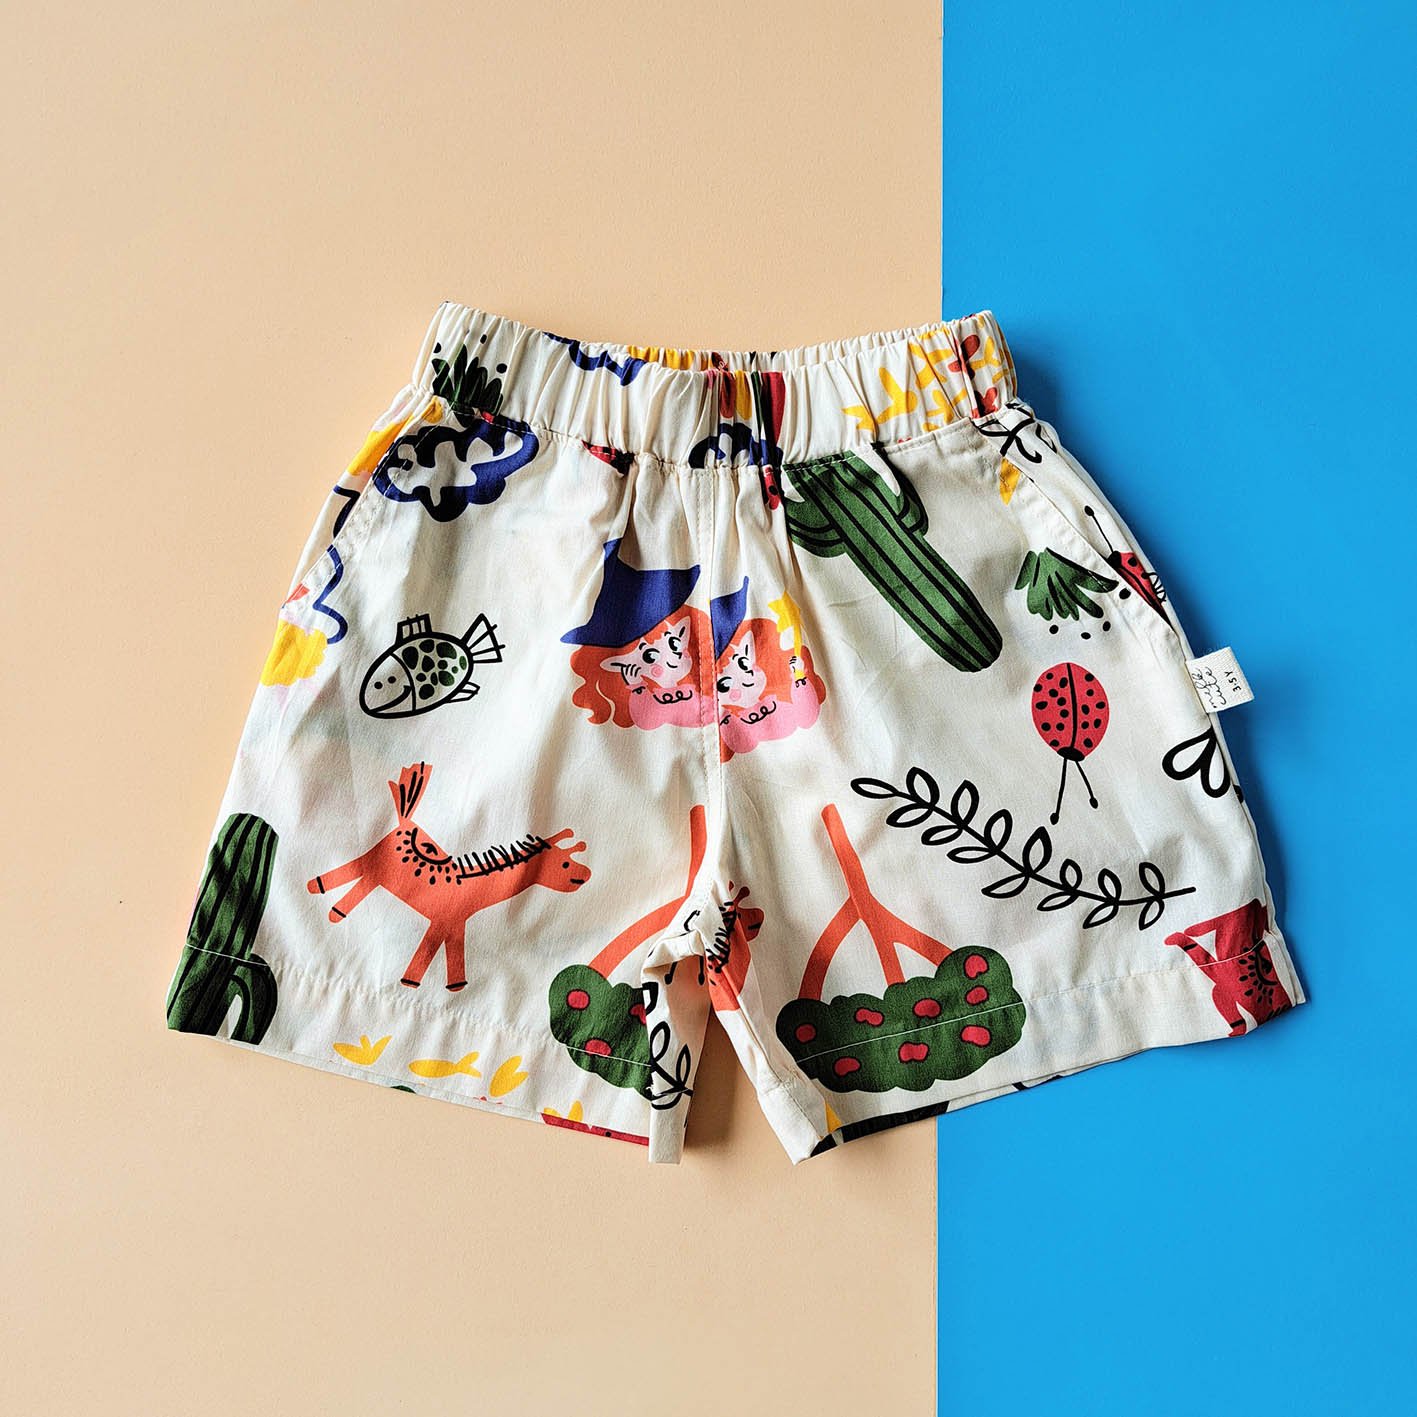 BOYS & GIRLS ELASTIC WAISTBAND FAIRY SHORTS / 100% PRINTED COTTON*PRE-ORDER SHIP OUT 3 MARCH